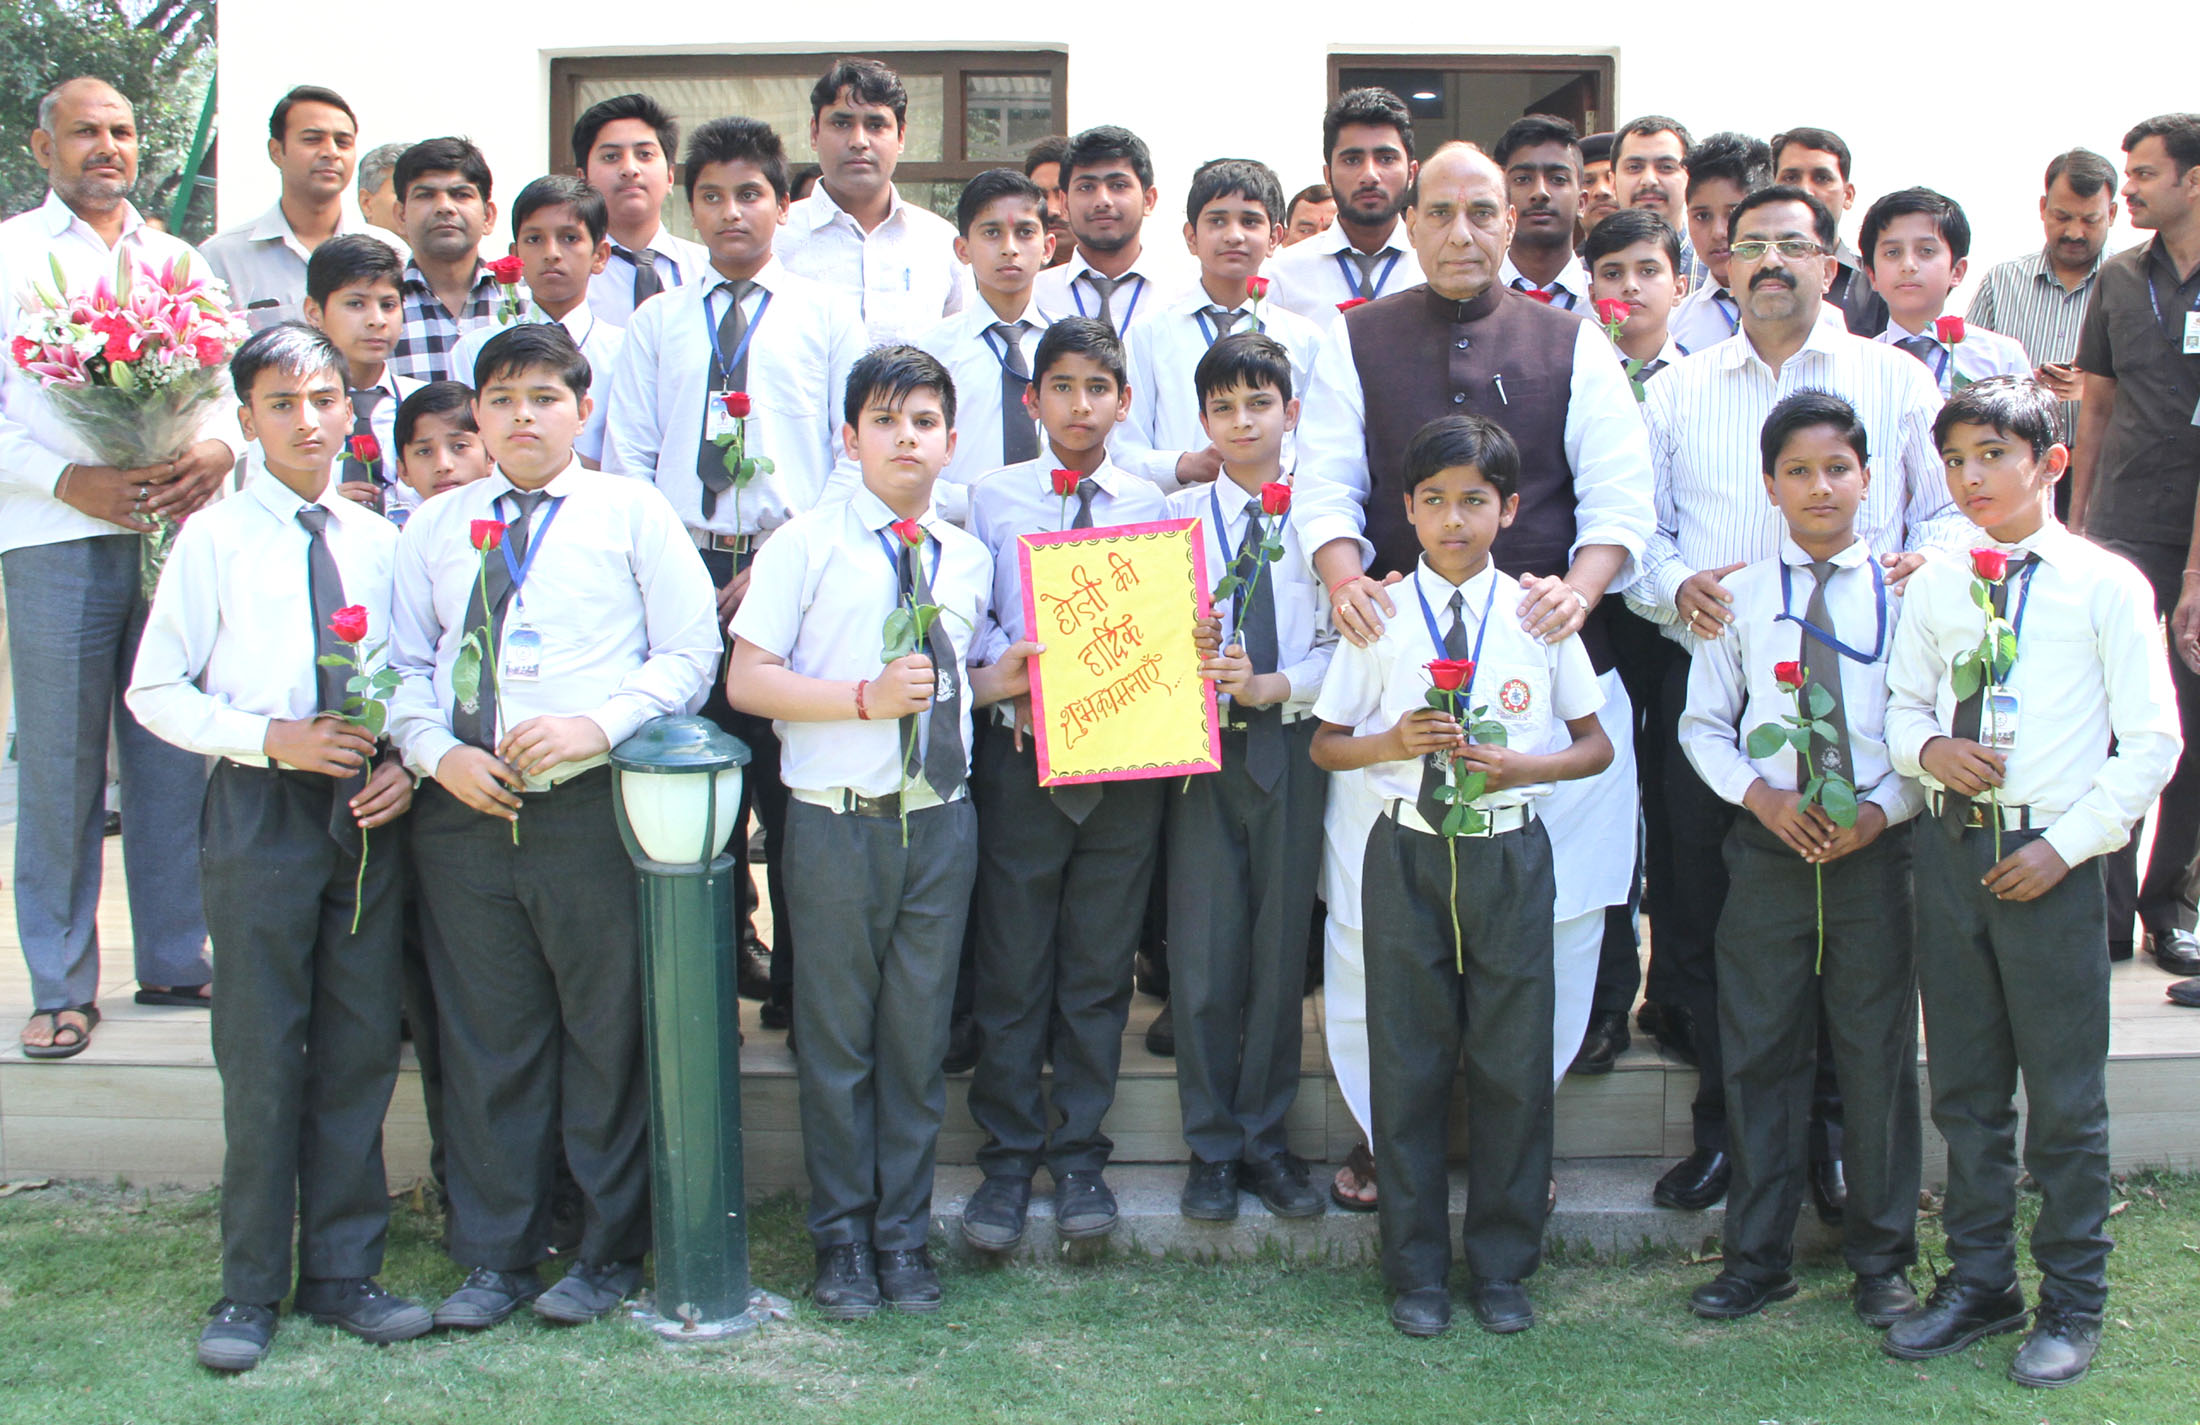 A group of students from S.K. Academy School extending the Holi festival wishes to the Union Home Minister, Shri Rajnath Singh, in New Delhi on March 23, 2016.